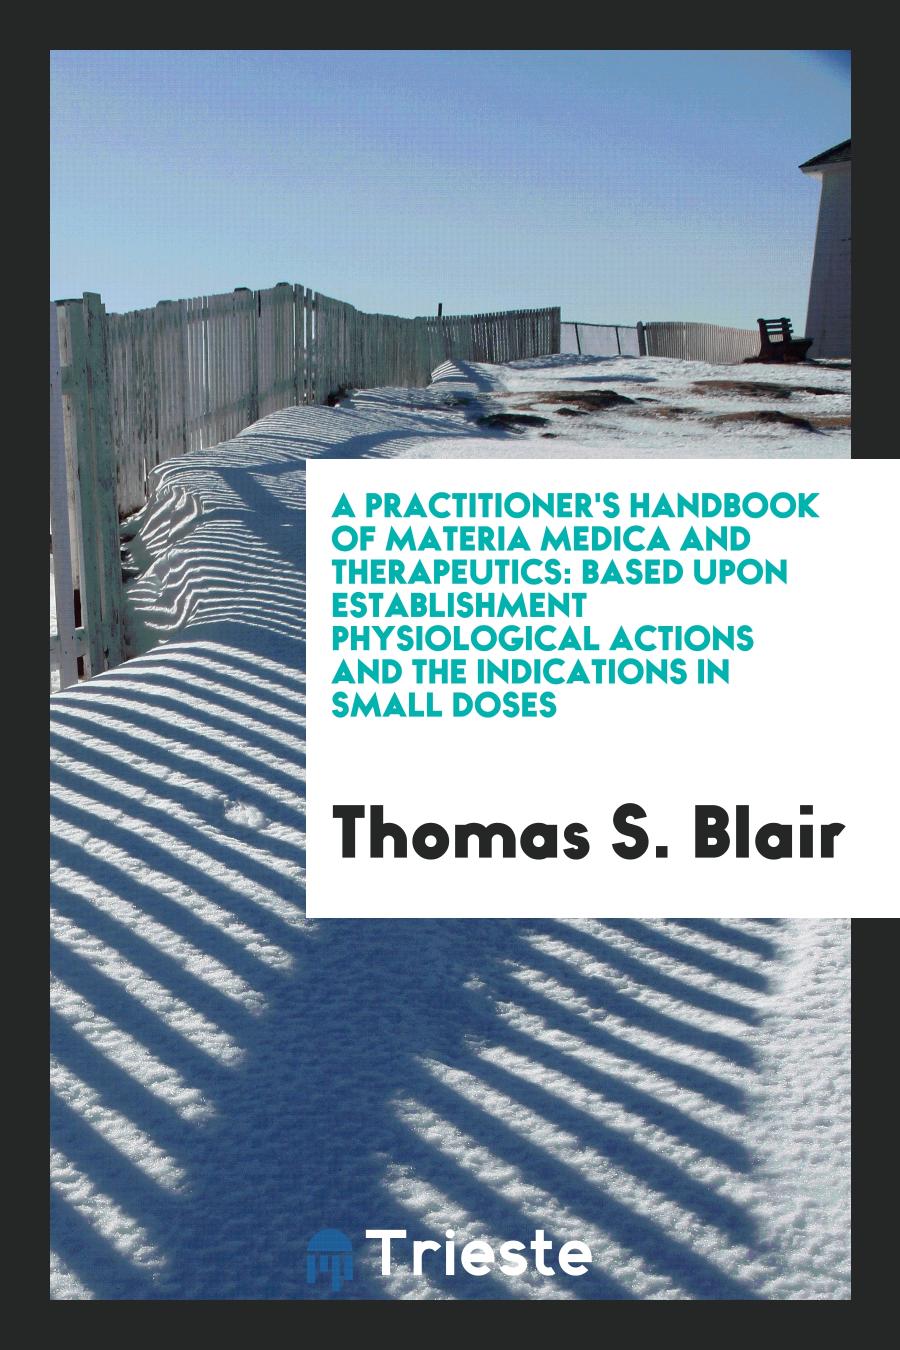 A Practitioner's Handbook of Materia Medica and Therapeutics: Based upon Establishment Physiological Actions and the Indications in Small Doses